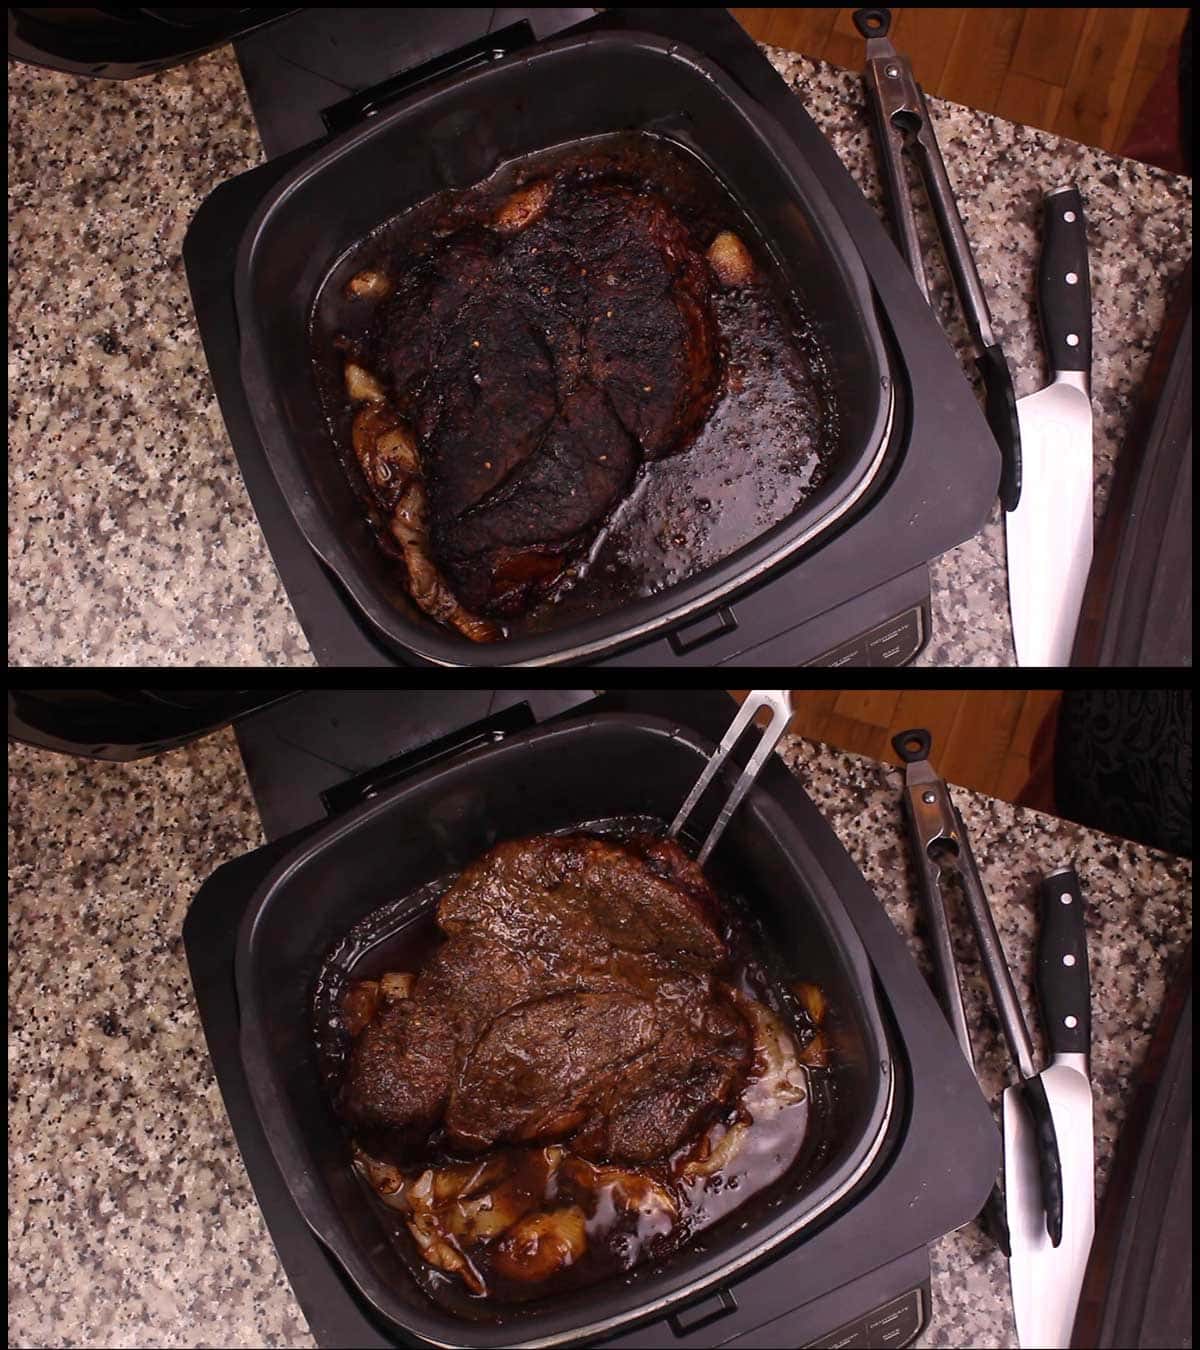 Flipping the roast after cooking for about 2 hours